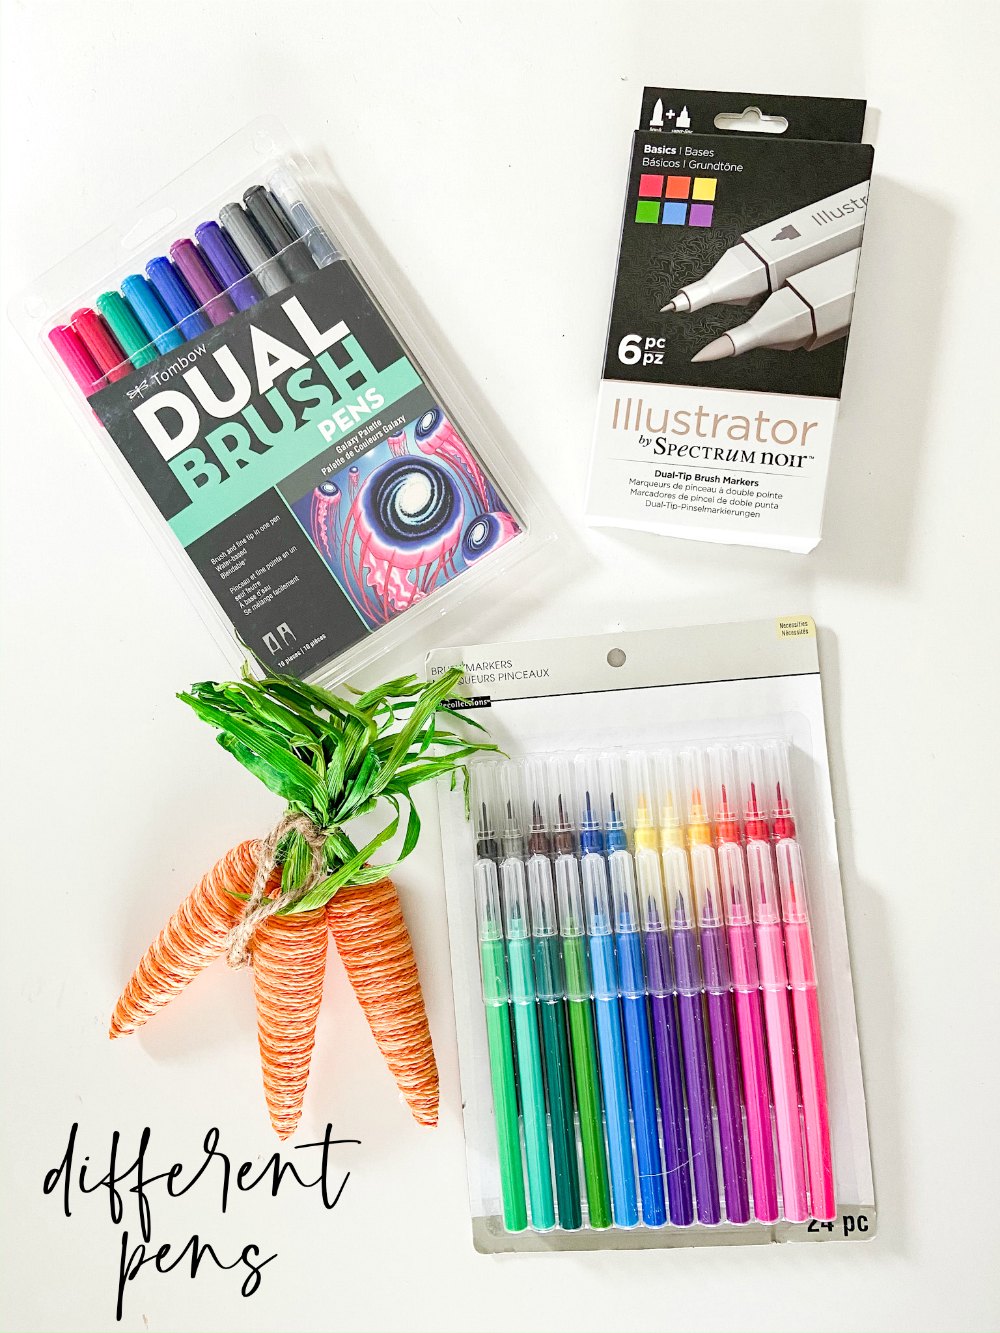 Easter Basket for the Creative Person in your Life! Fill a basket this Easter with useful art supplies that will provide hours of creative expression and joy for months to come! 